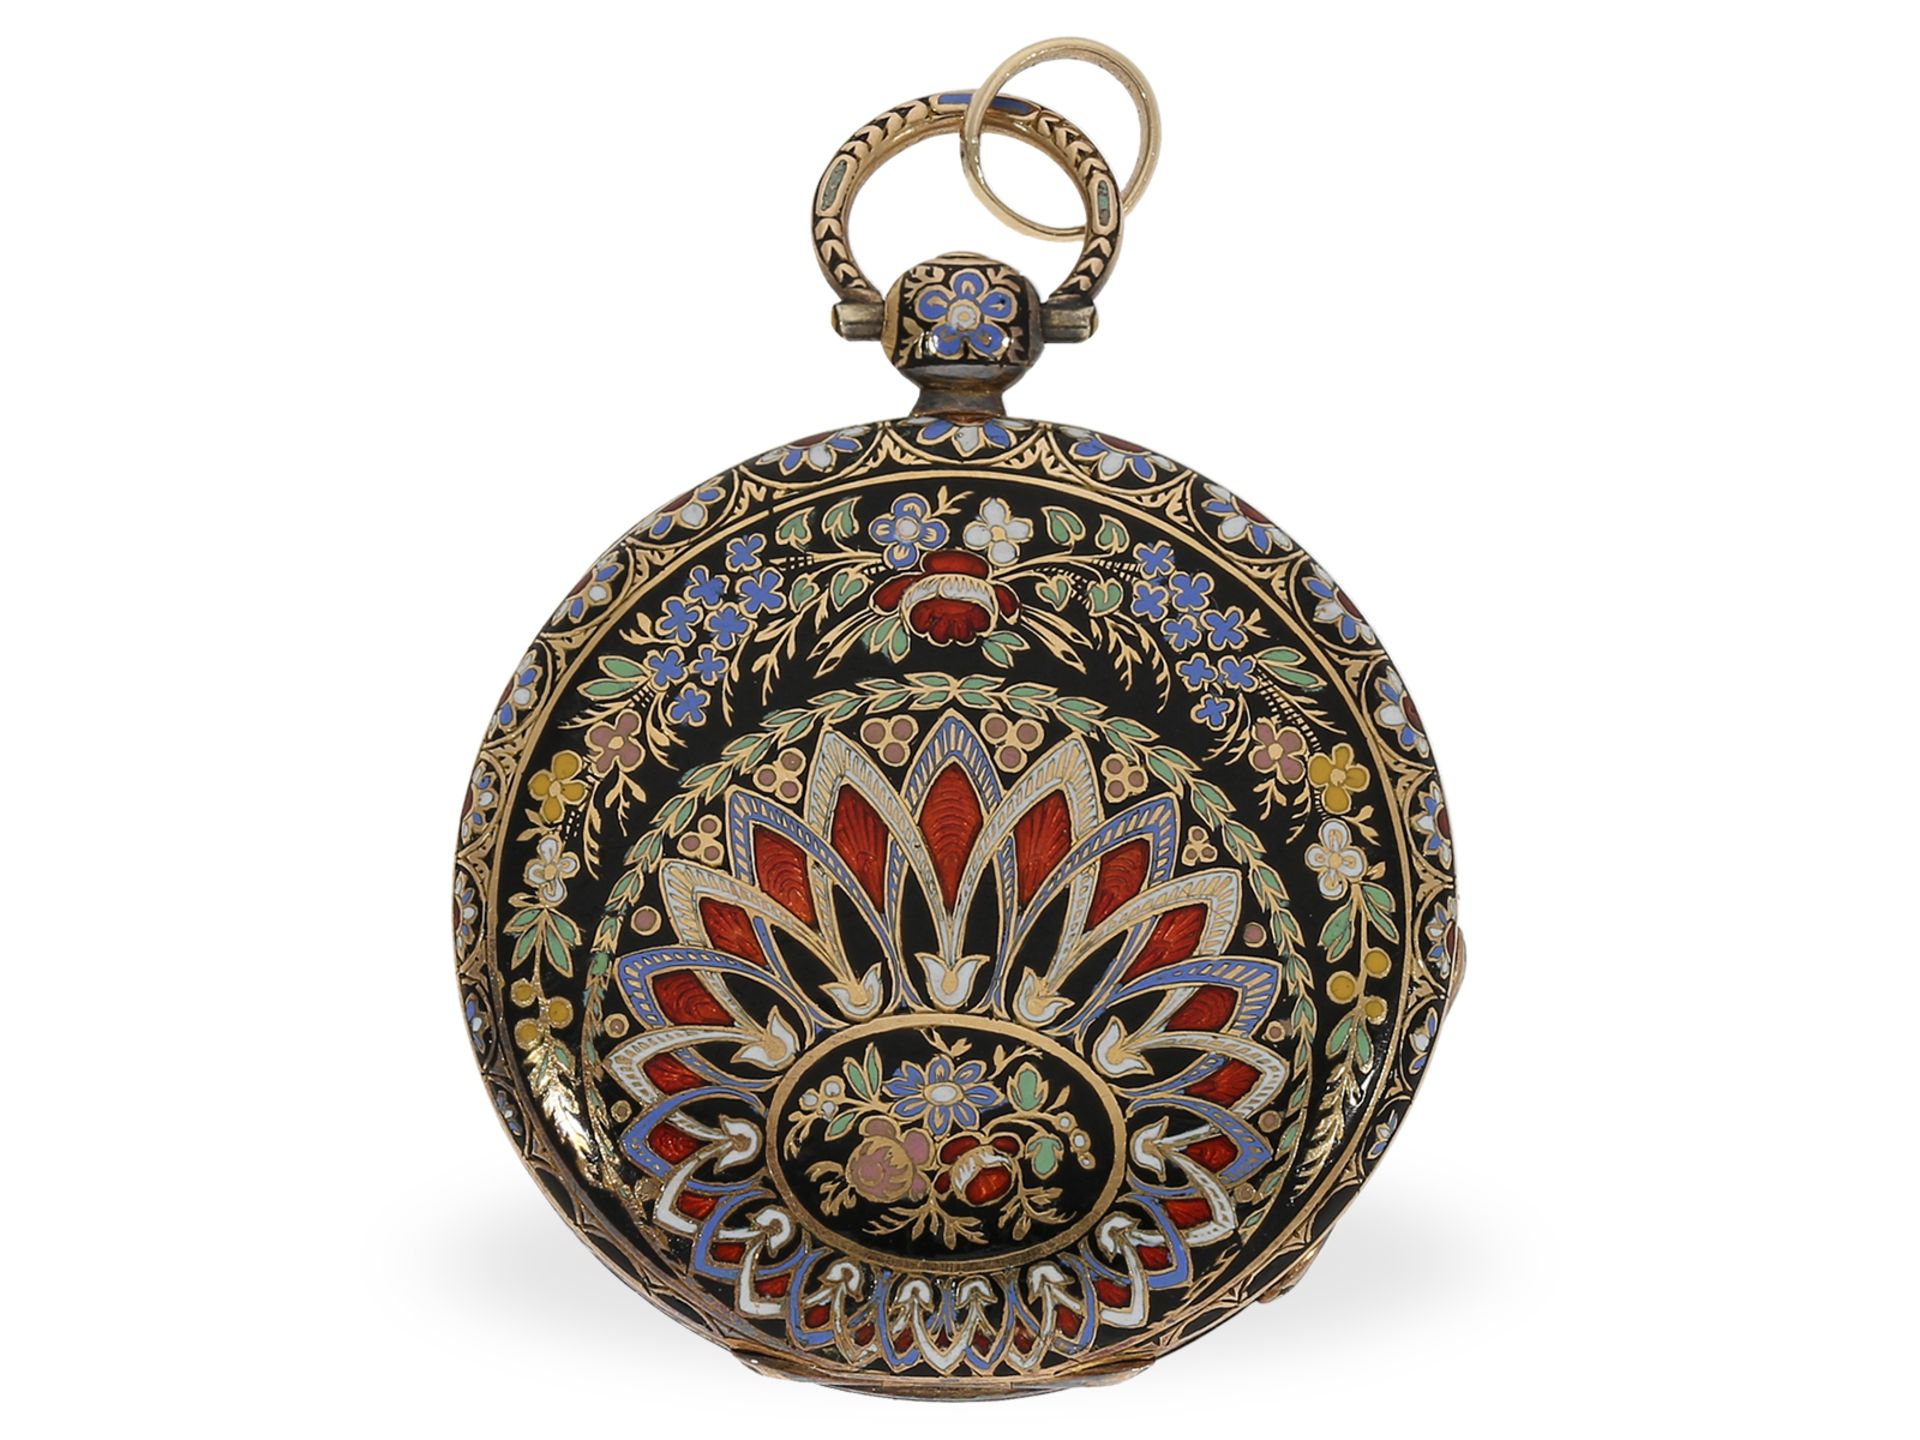 Pocket watch: magnificent gold/enamel lepine with original box and gold key, ca. 1820 - Image 2 of 9